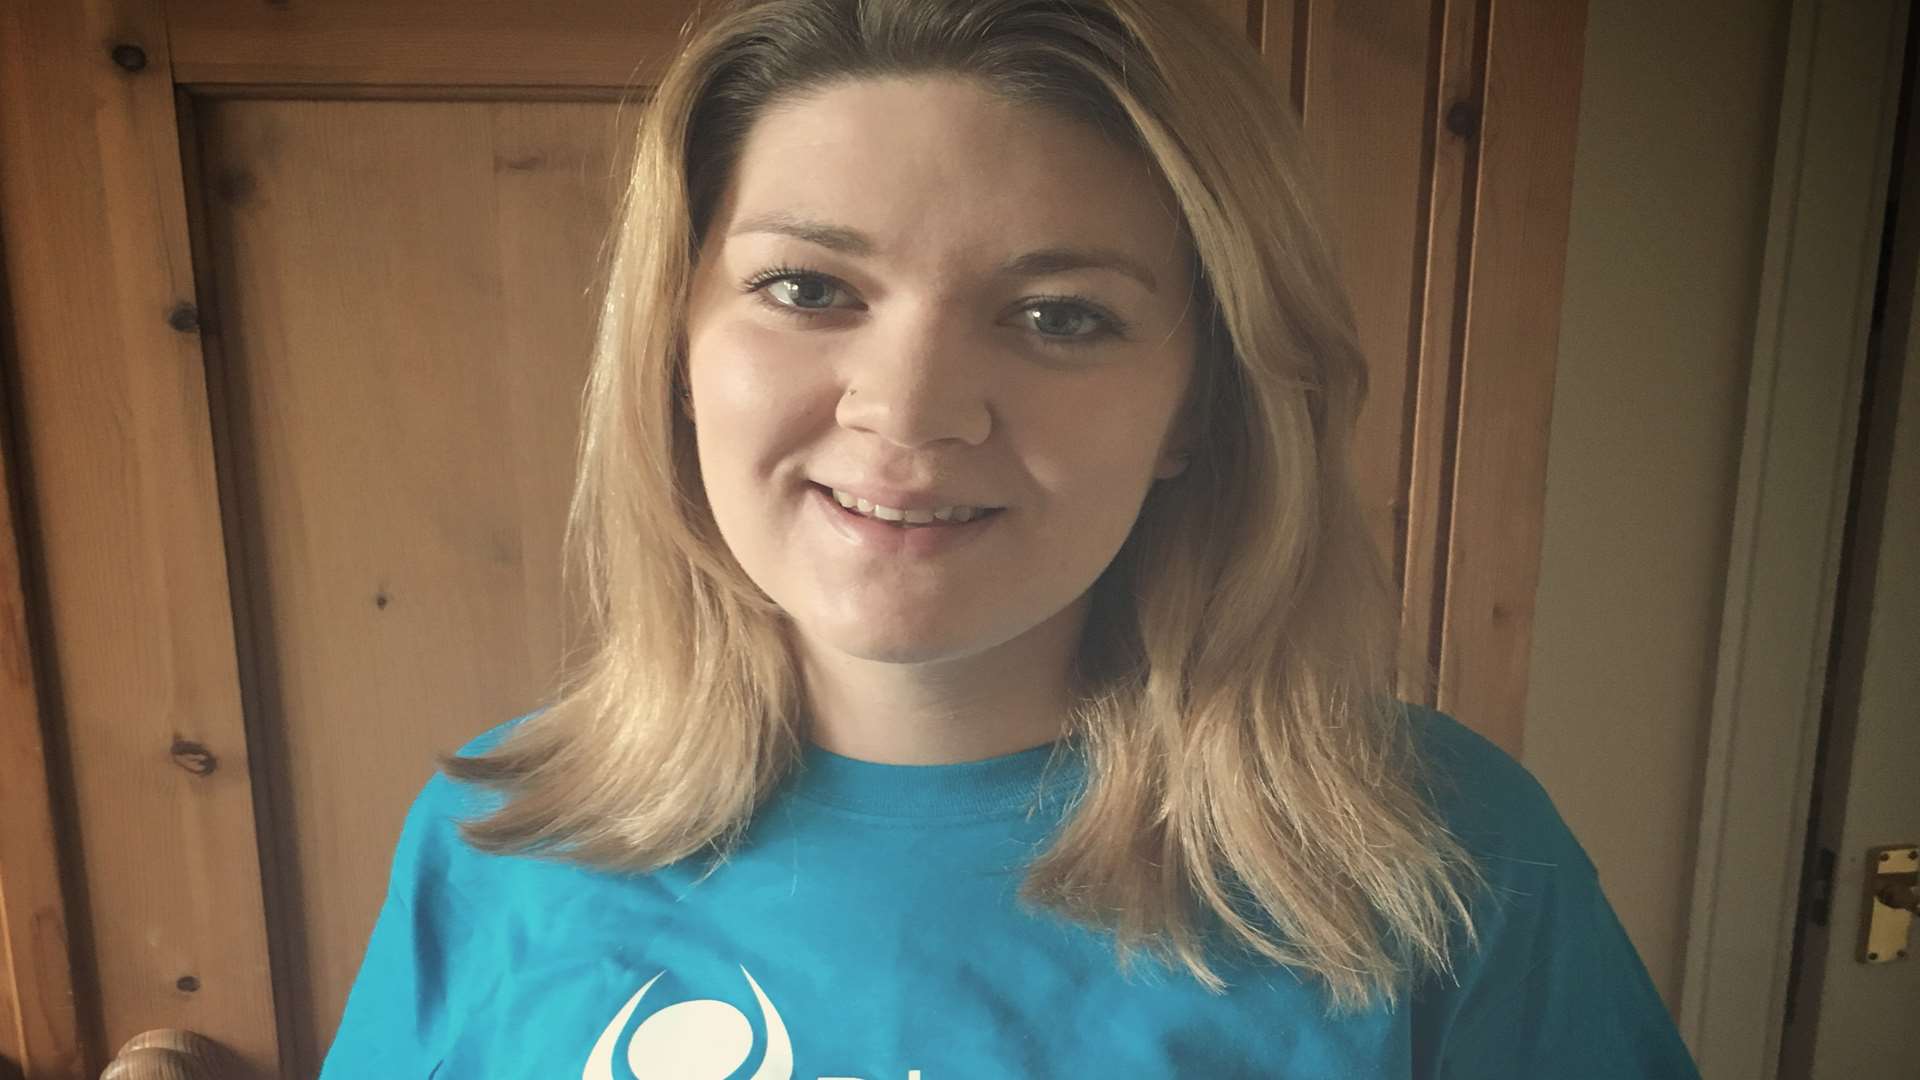 Jodie Waddington is taking part in the Tough Mudder challenge in aid of Pilgrims Hospices.